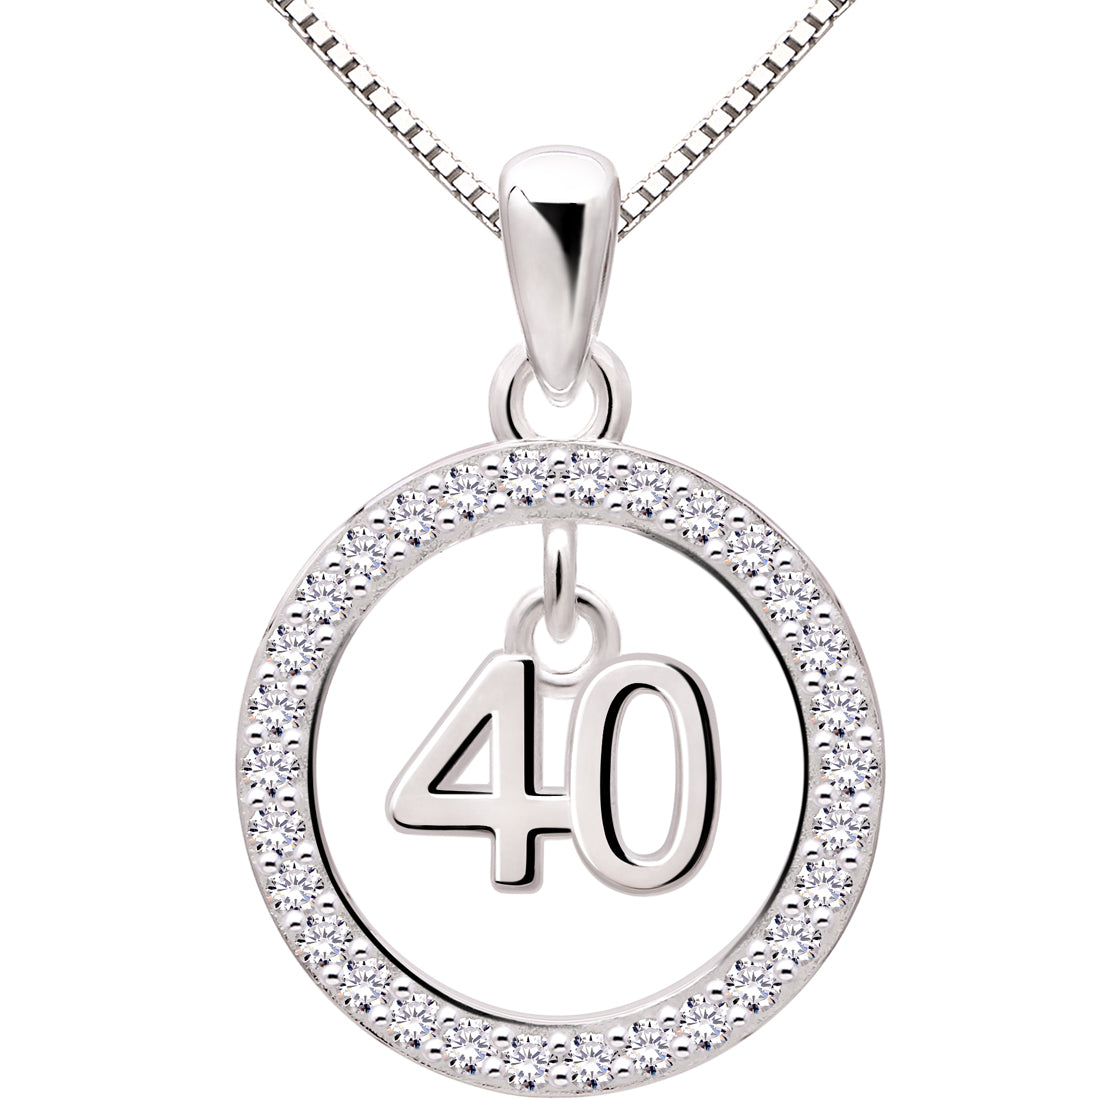 ALOV Jewelry Sterling Silver 40th Birthday Anniversary Lucky Number 40 Cubic Zirconia Pendant Necklace